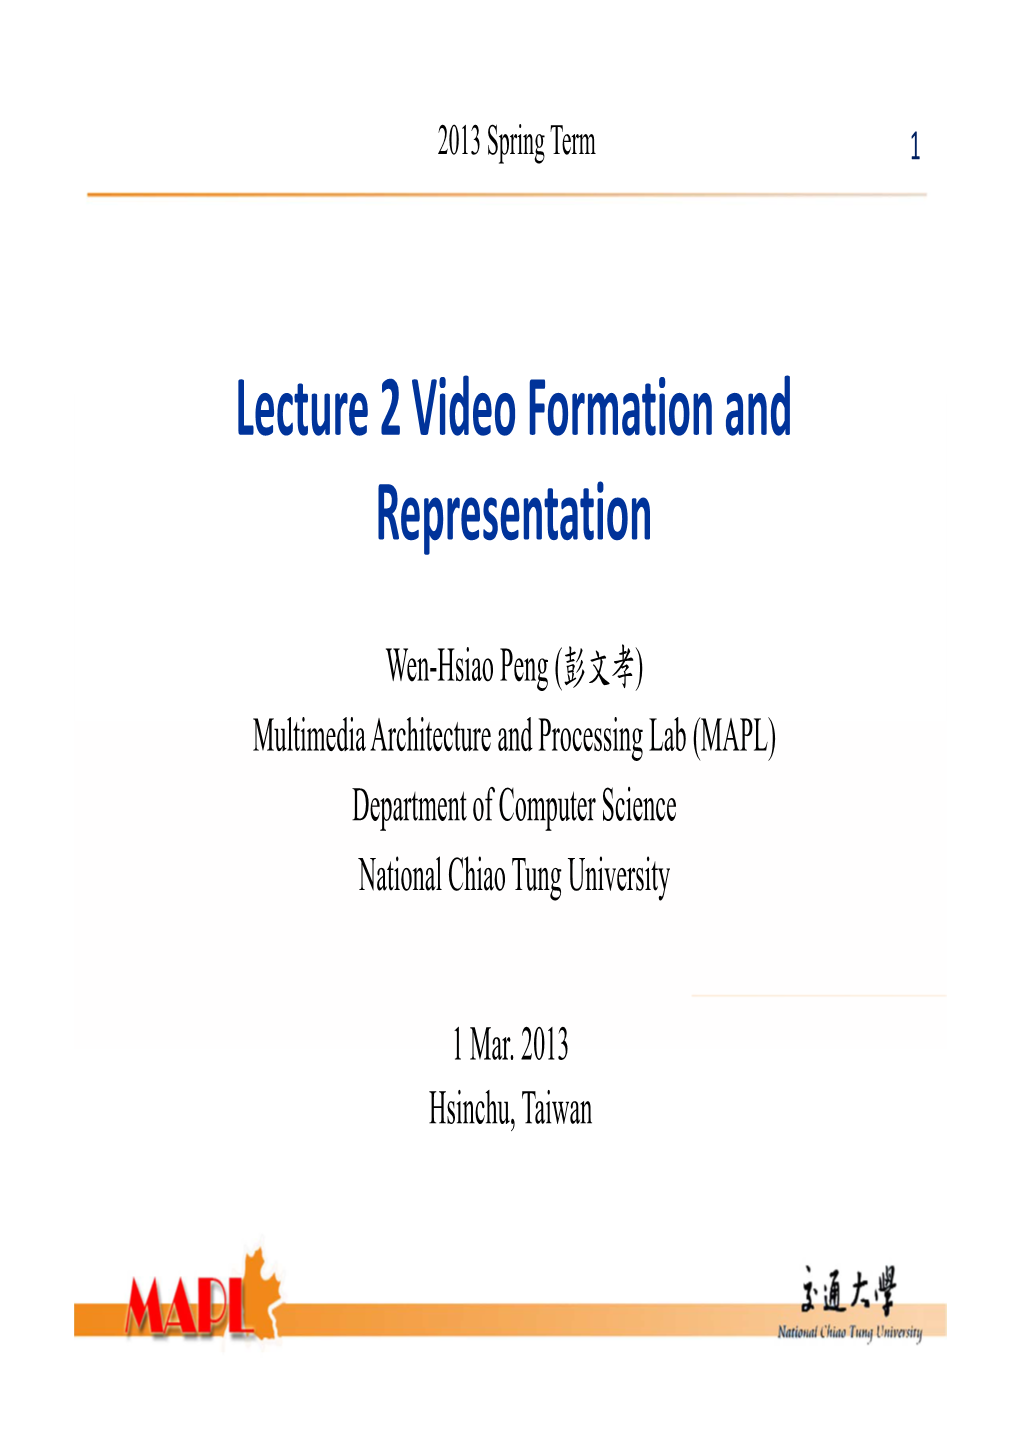 Lecture 2 Video Formation and Representation